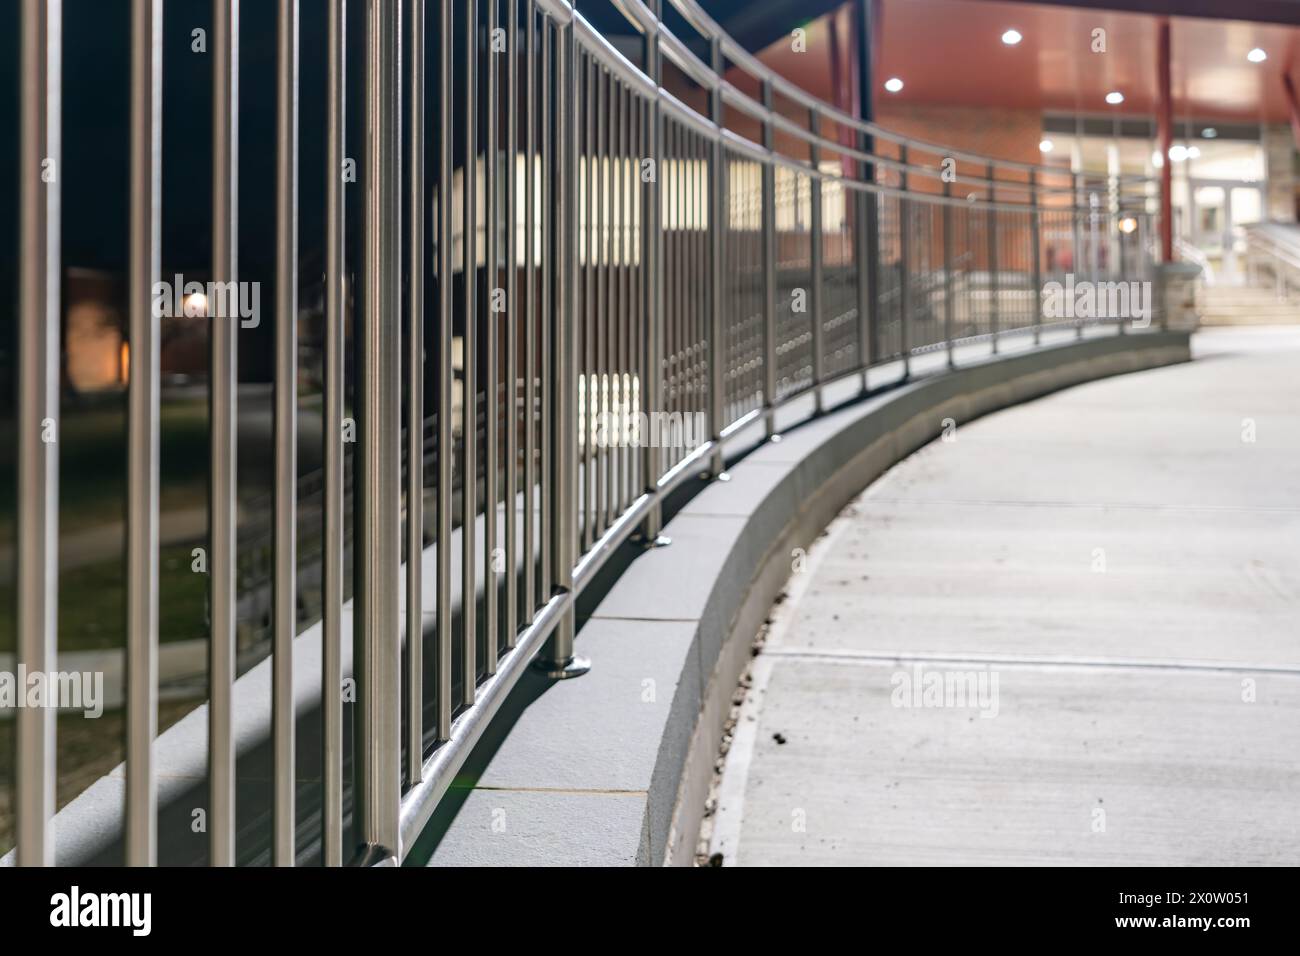 Example of a stainless steel railing along a concrete sidewalk, at the top of retaining wall. Stock Photo